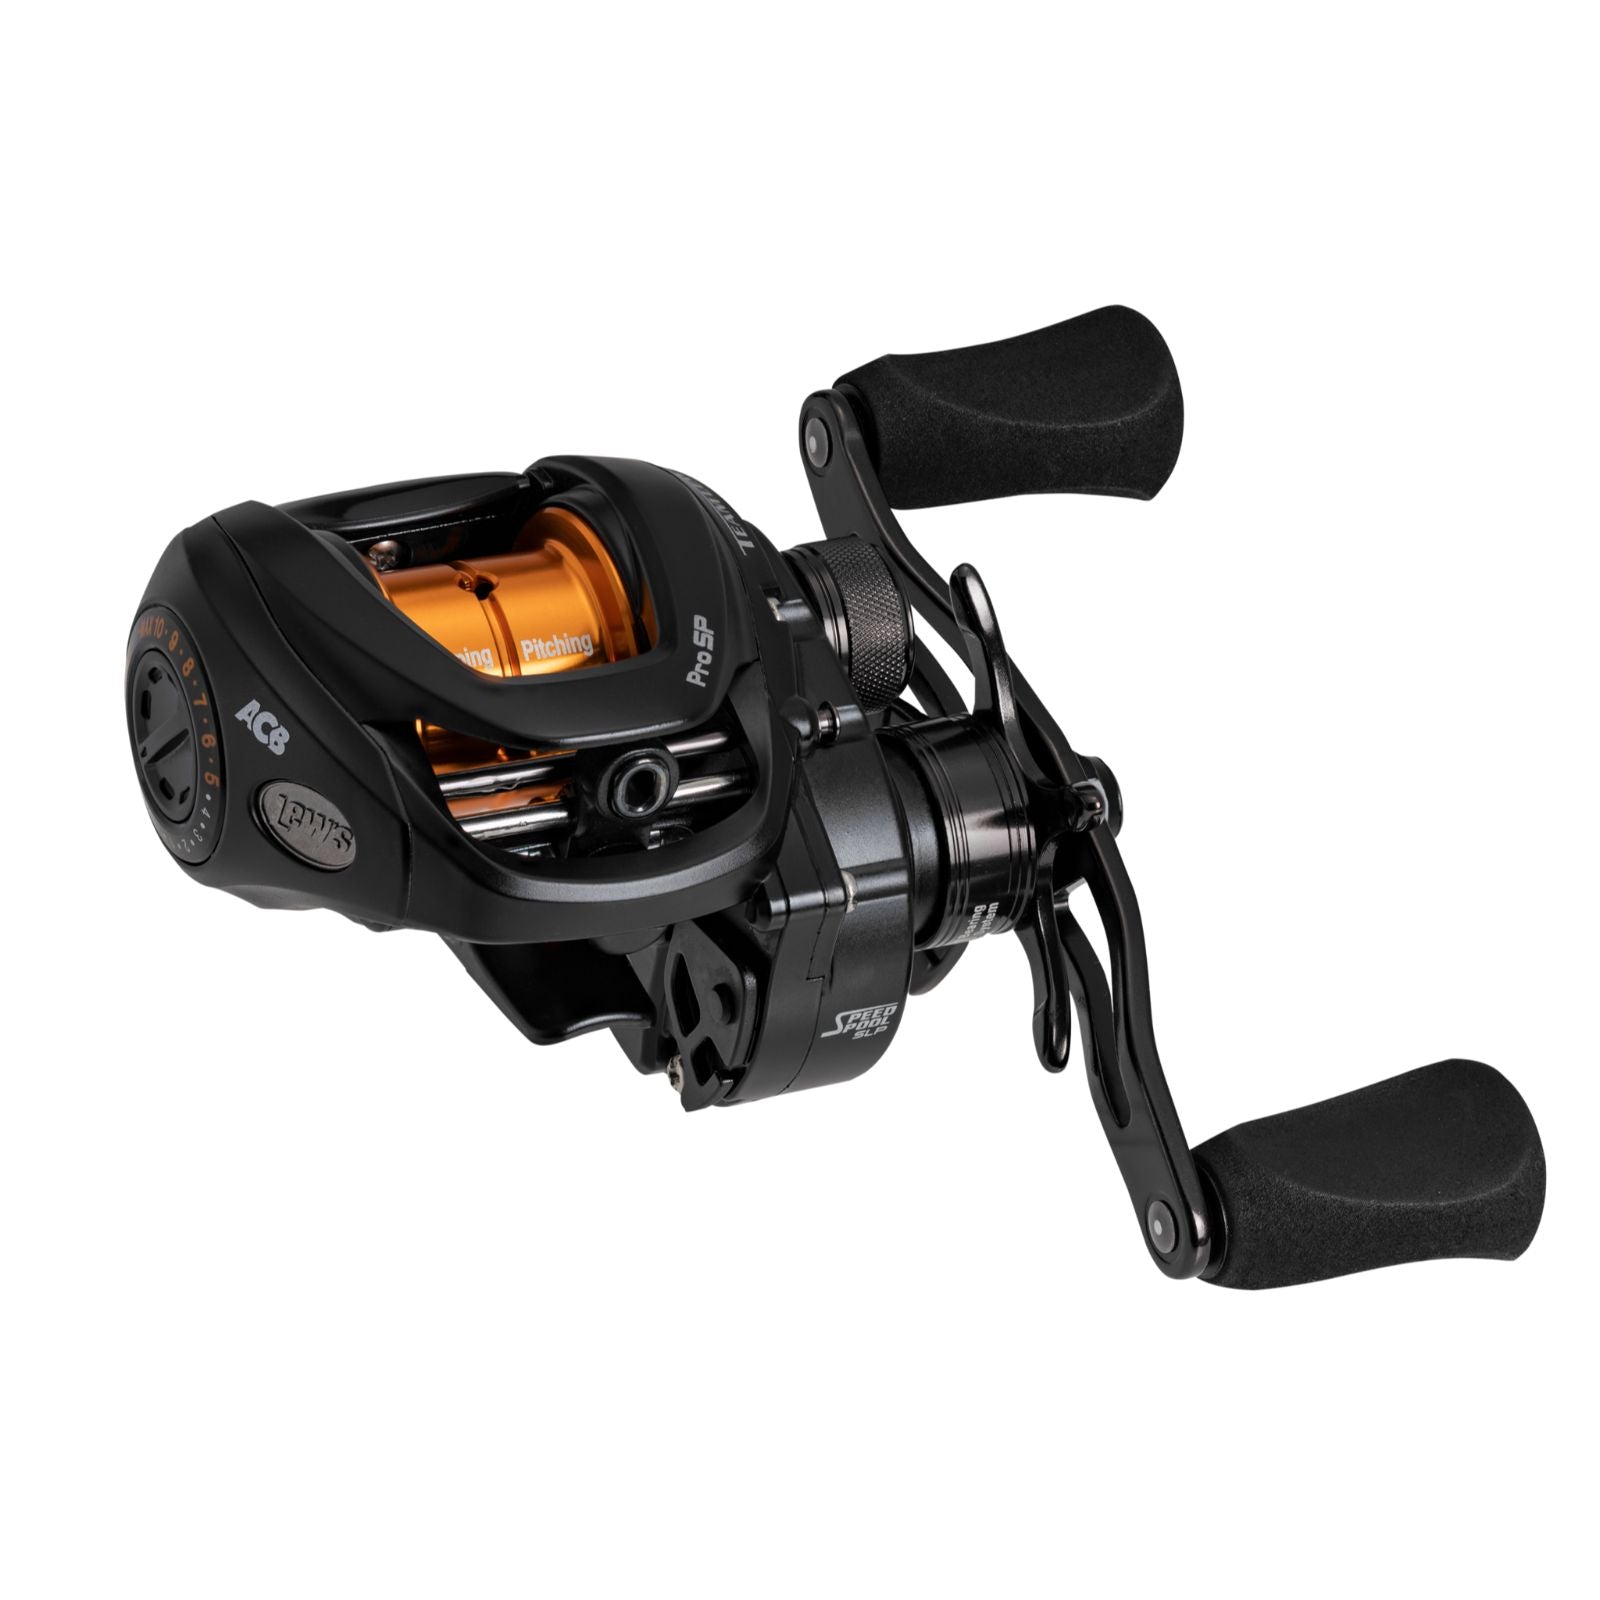 Fluorocarbon Lews Pro S and P Speed Spool Baitcast Reel from Fish On Outlet